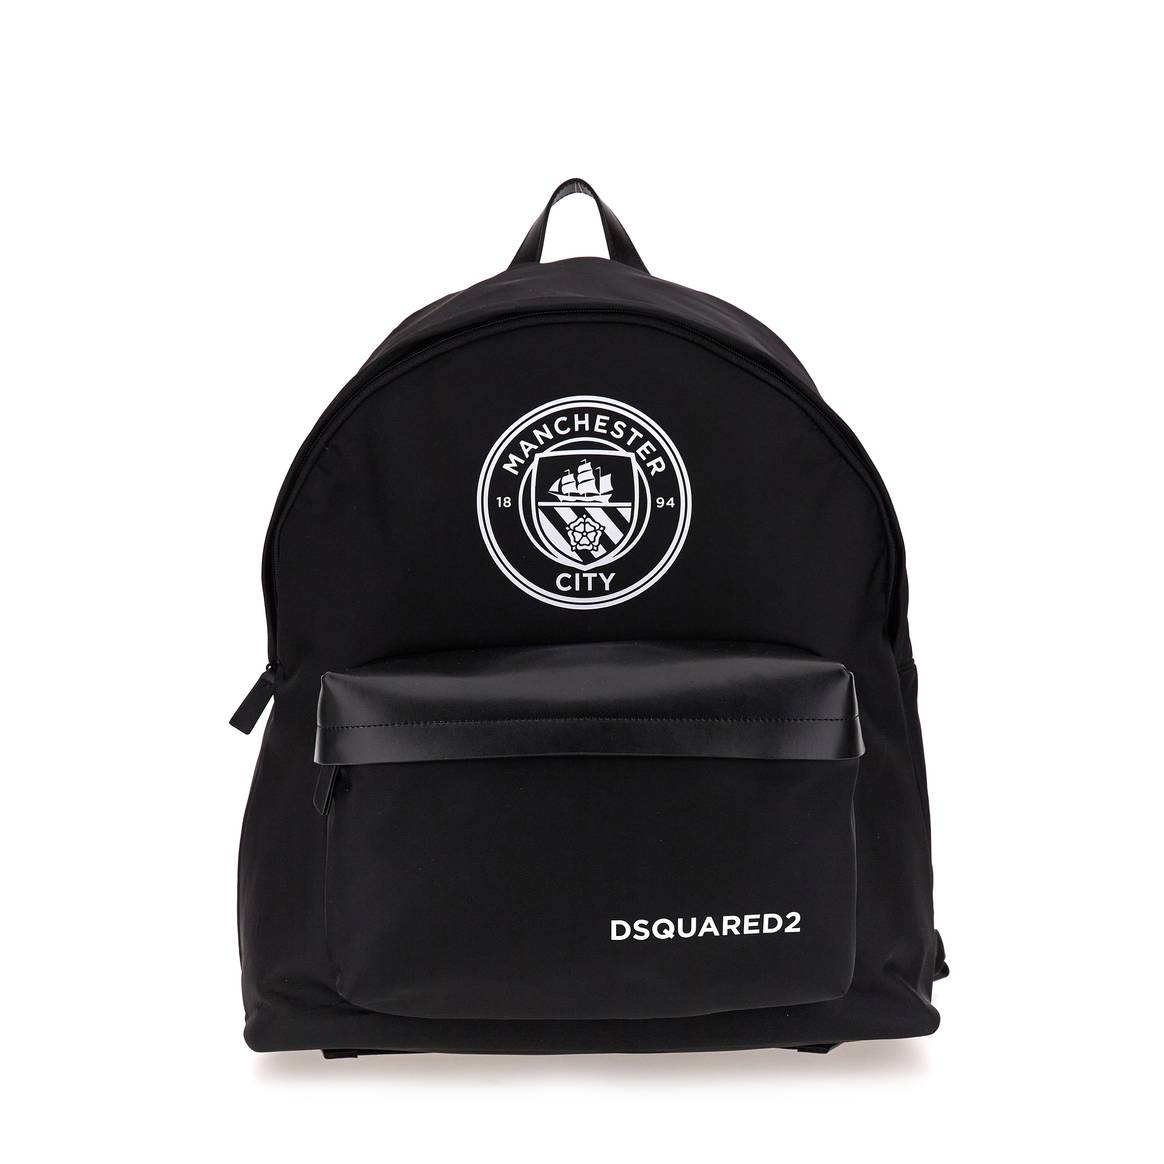 Image: Dsquared2; Dsquared2 x Manchester City capsule collection